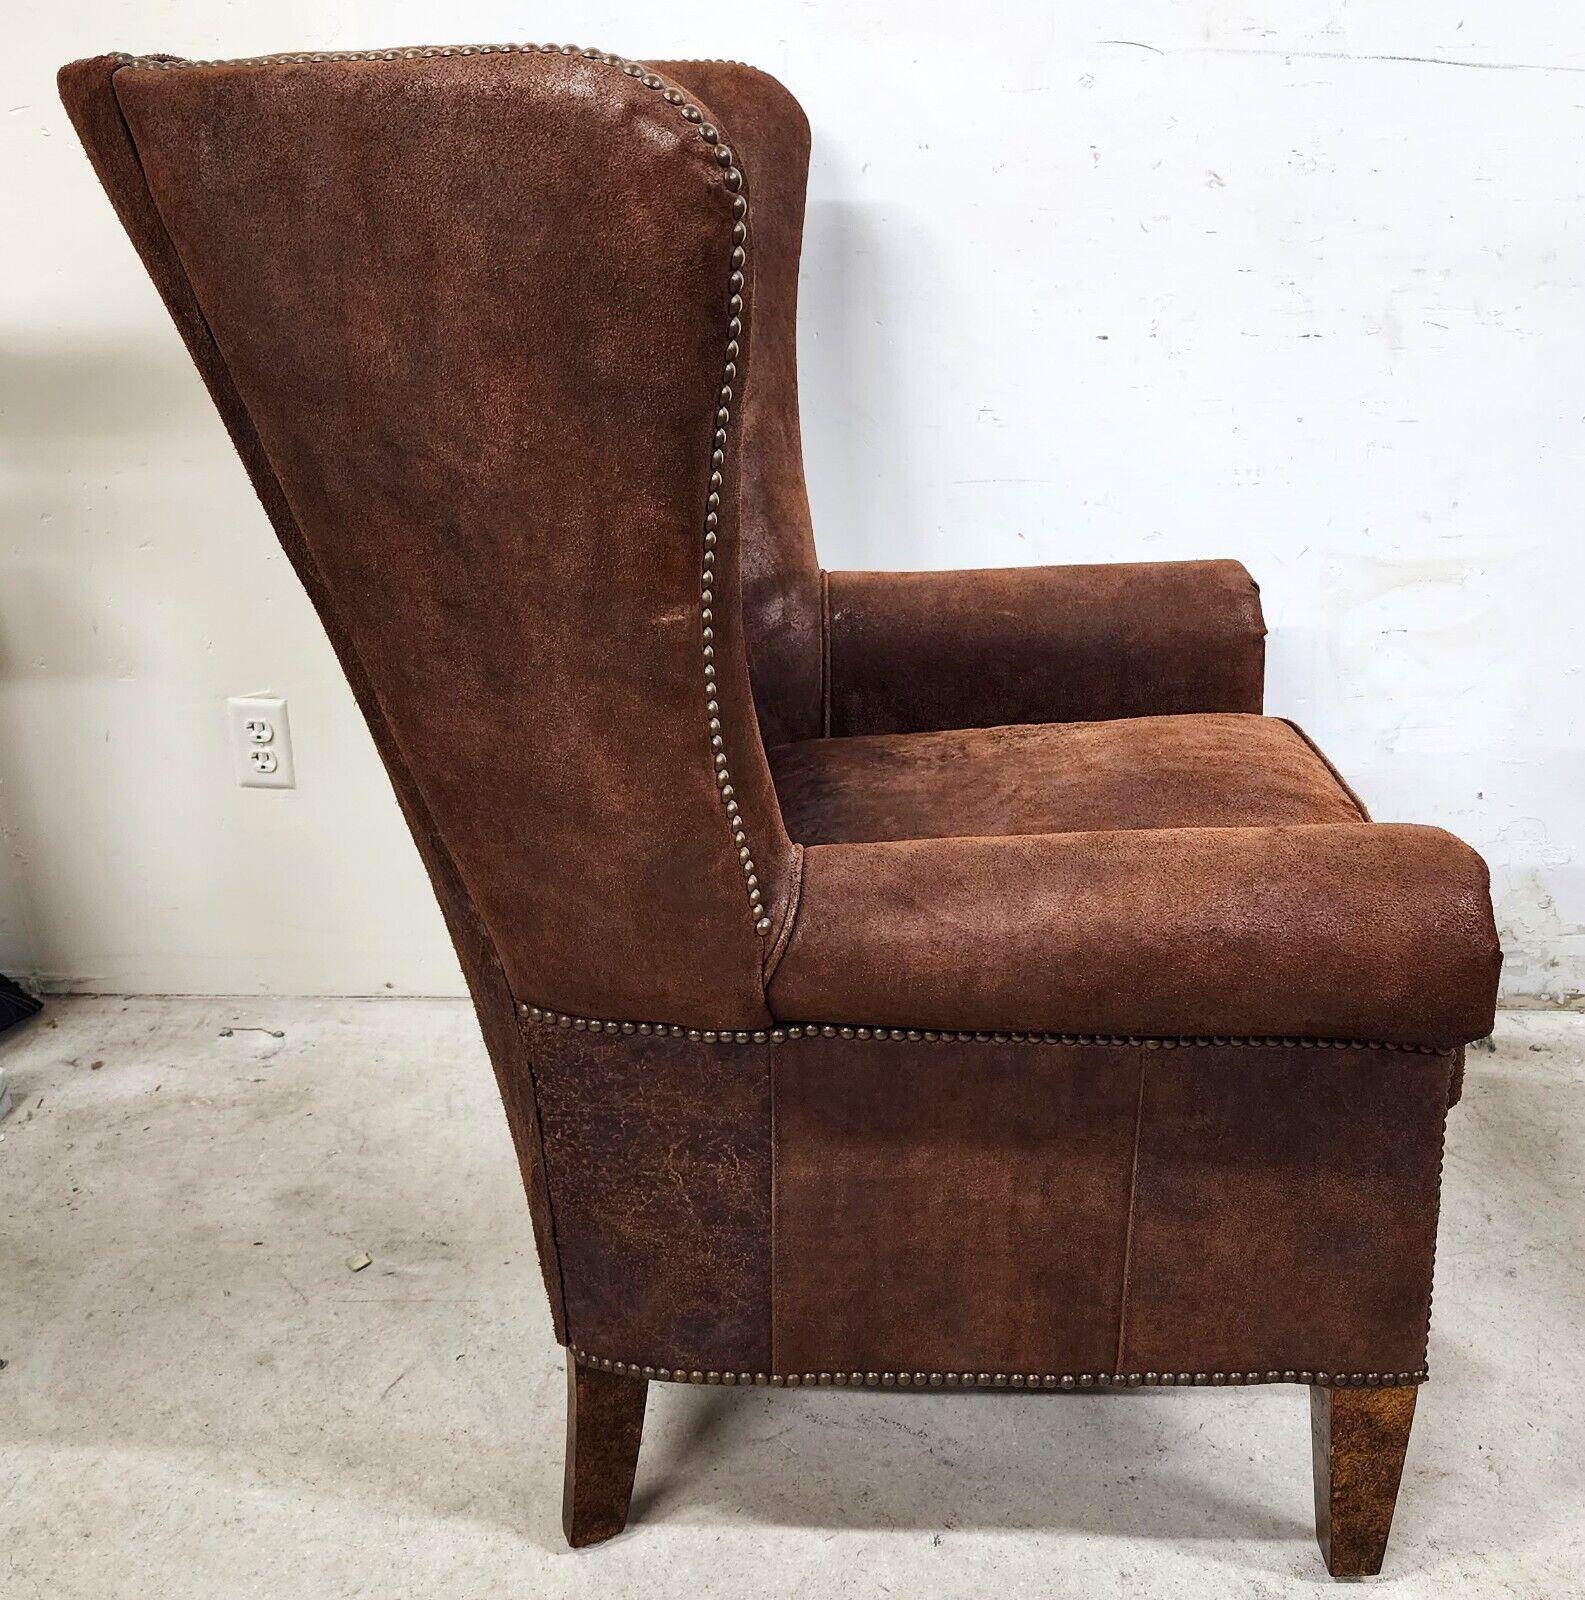 Offering One Of Our Recent Palm Beach Estate Fine Furniture Acquisitions Of A
Western Country Rustic Lodge Suede Leather Wingback Lounge Chair by PAUL ROBERT

Approximate Measurements in Inches
43